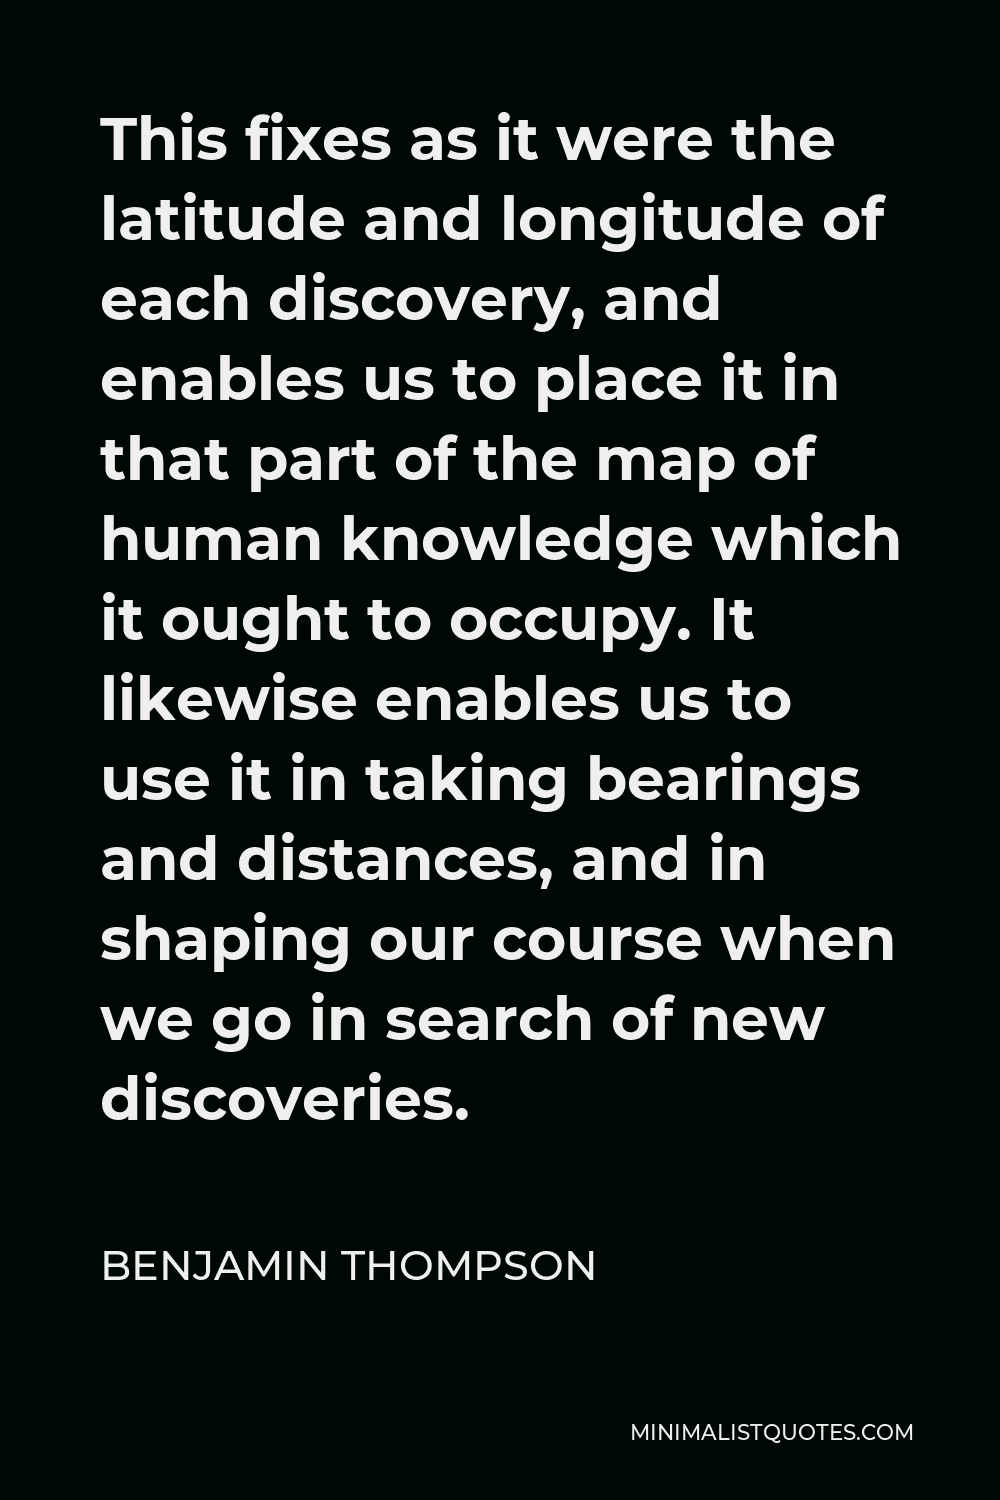 Benjamin Thompson Quote - This fixes as it were the latitude and longitude of each discovery, and enables us to place it in that part of the map of human knowledge which it ought to occupy. It likewise enables us to use it in taking bearings and distances, and in shaping our course when we go in search of new discoveries.